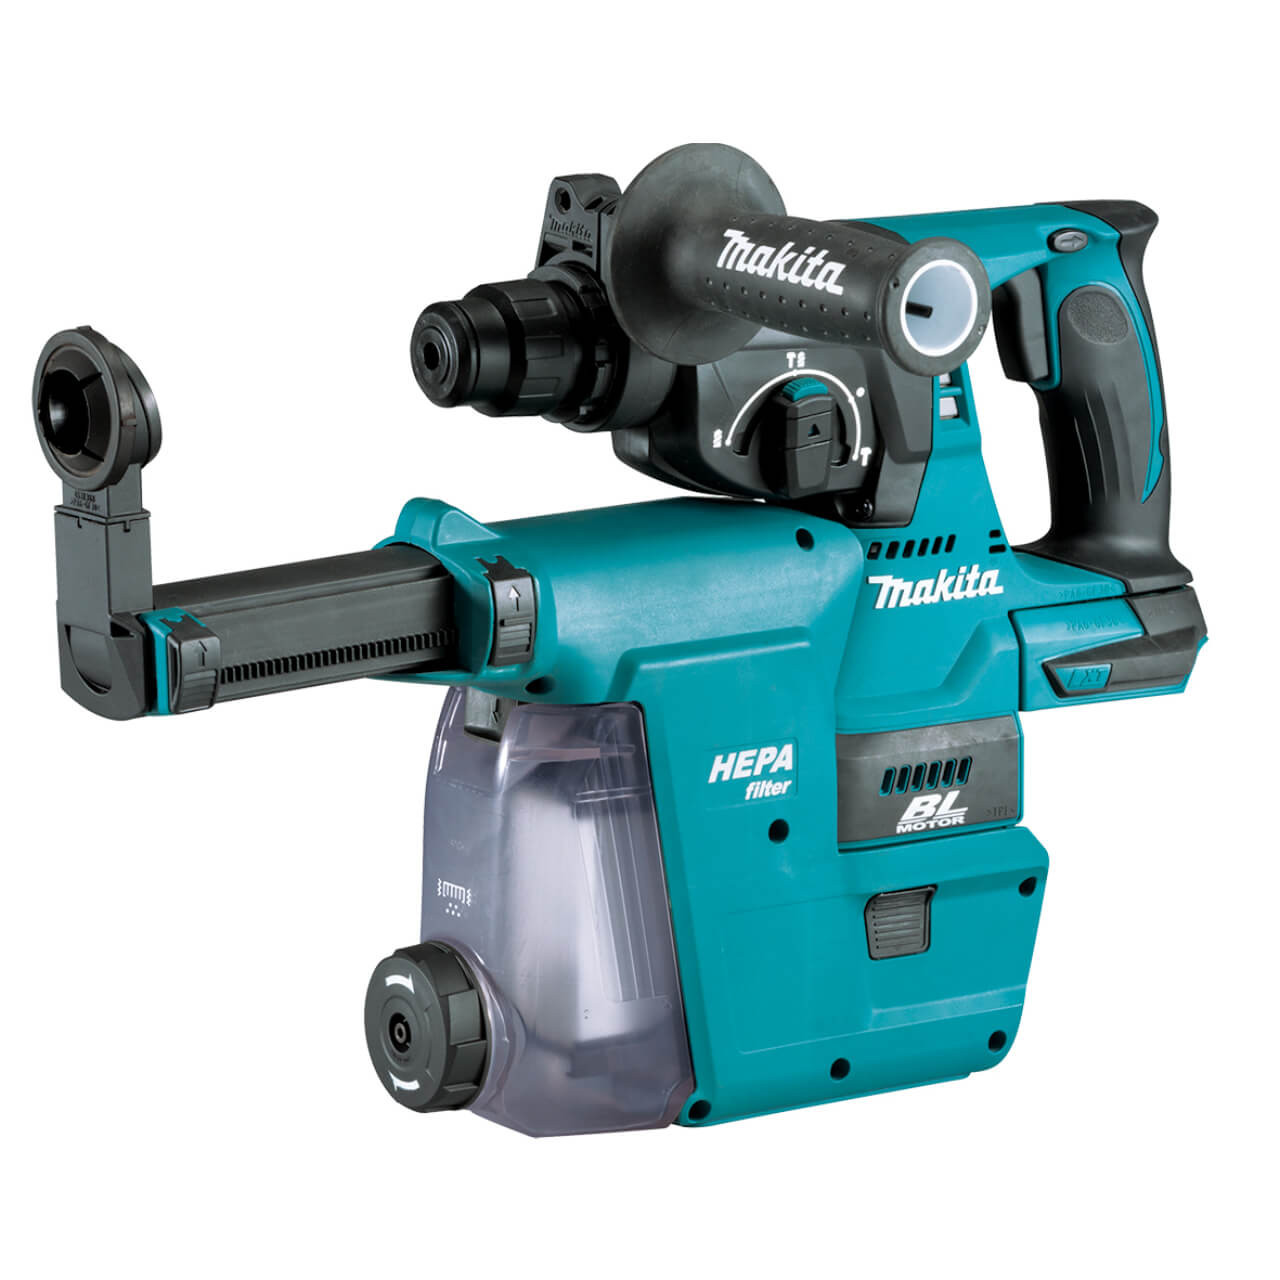 Makita 18V BRUSHLESS 24mm Rotary Hammer. Dust Extraction Adaptor (DX06). Case - Tool Only